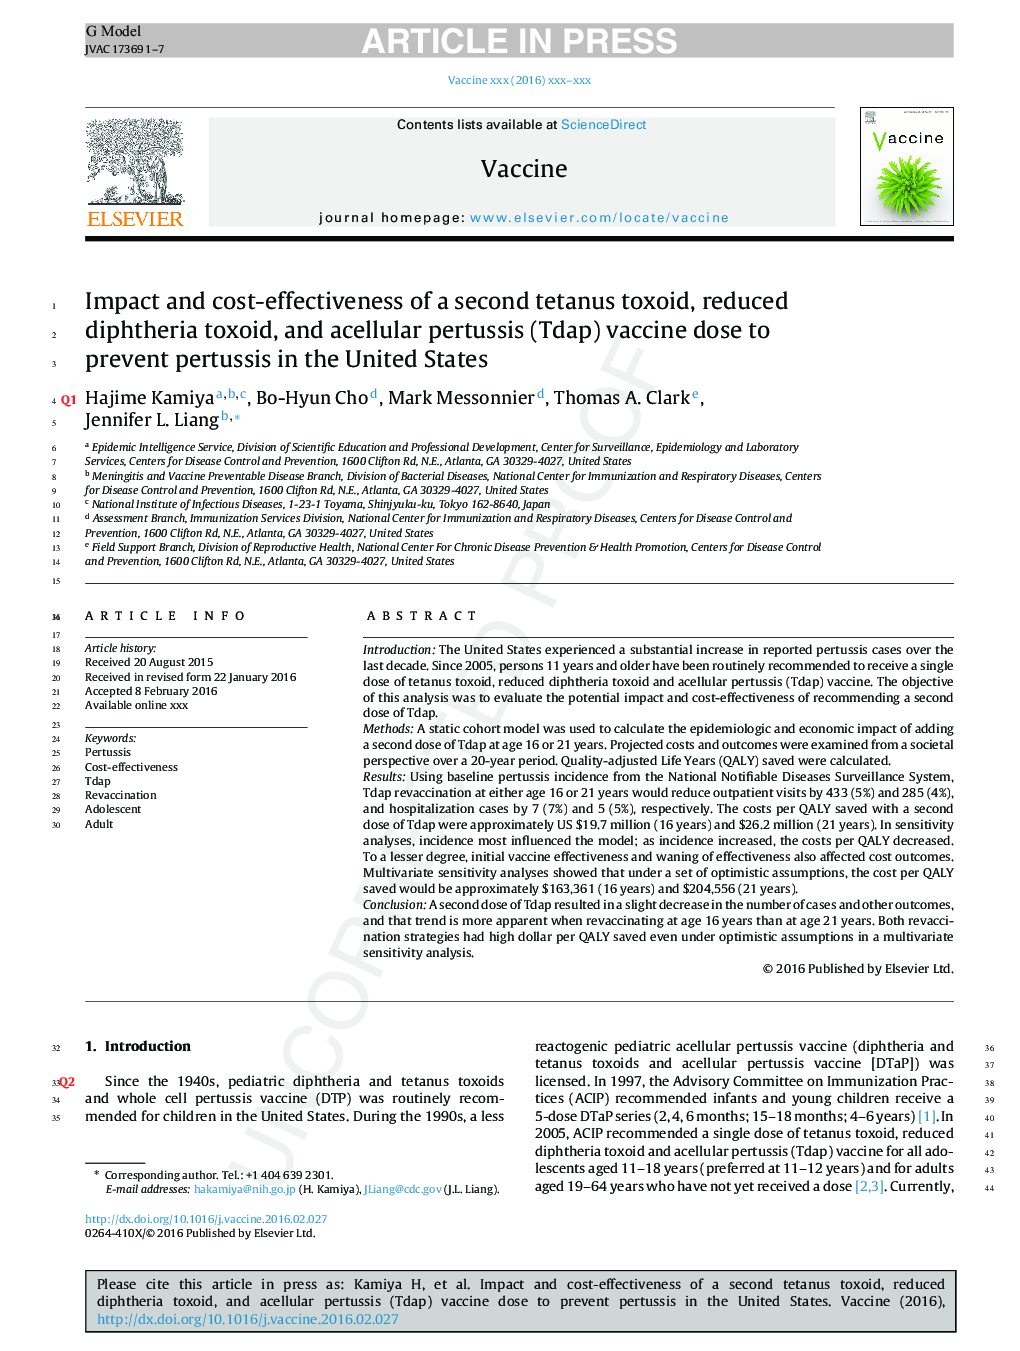 Impact and cost-effectiveness of a second tetanus toxoid, reduced diphtheria toxoid, and acellular pertussis (Tdap) vaccine dose to prevent pertussis in the United States